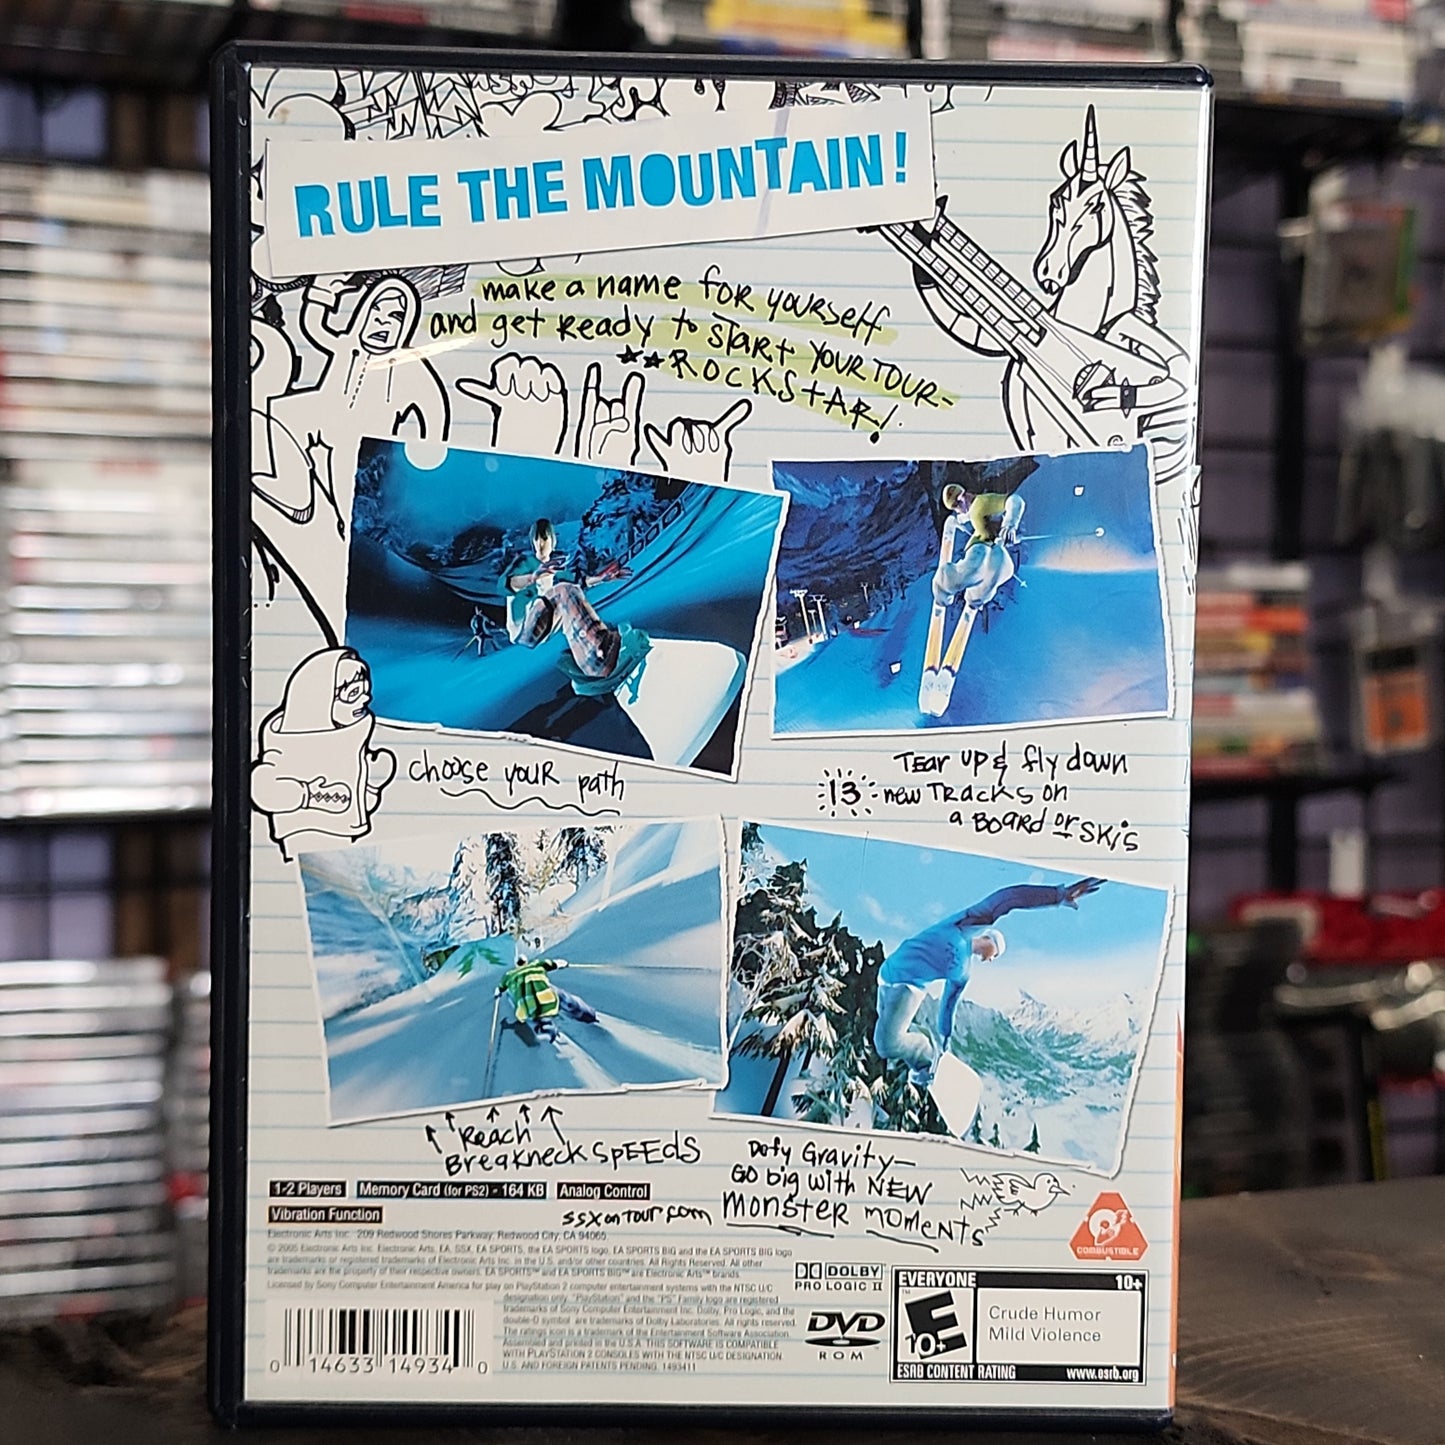 Playstation 2 - SSX On Tour Retrograde Collectibles CIB, E10 Rated, EA Canada, EA Sports Big, M Rated, Playstation 2, PS2, Skiing, Snowboarding, SSX Preowned Video Game 